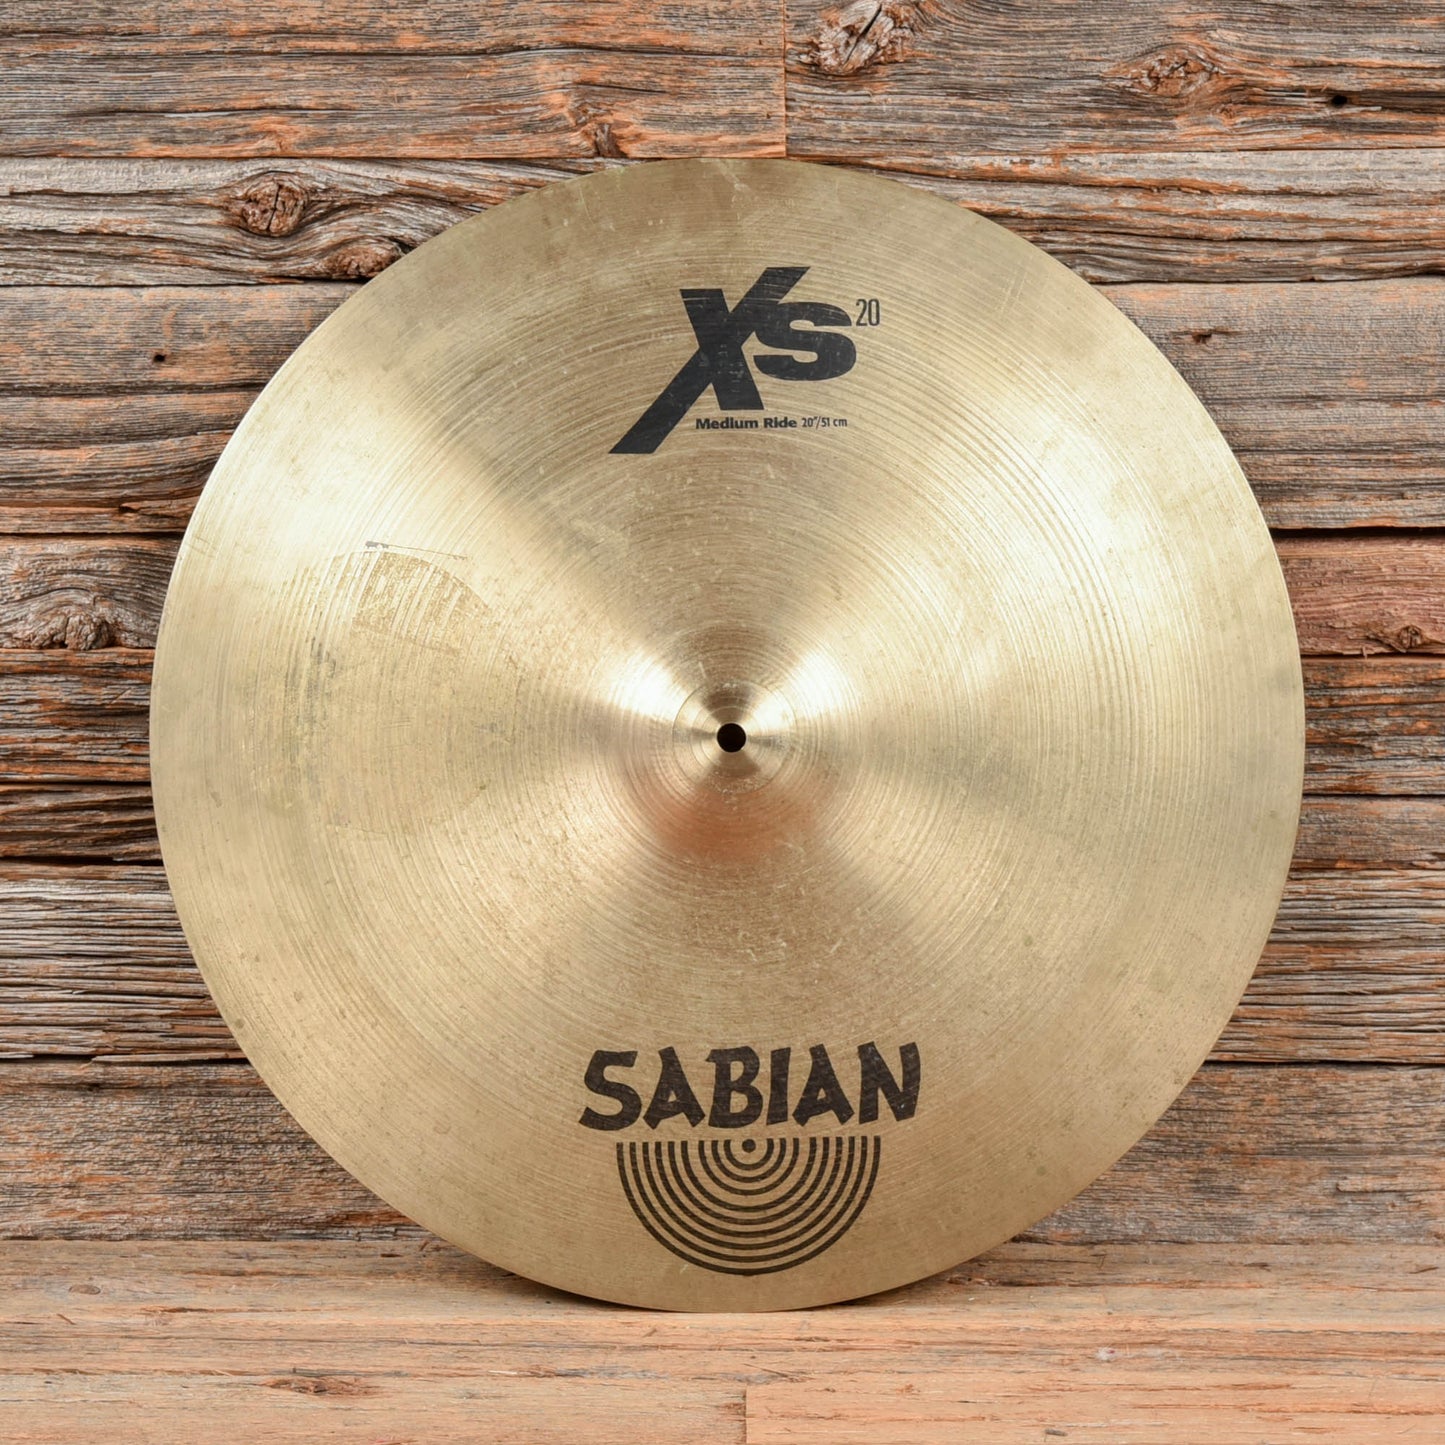 Sabian 20" XS20 Medium Ride Cymbal USED Drums and Percussion